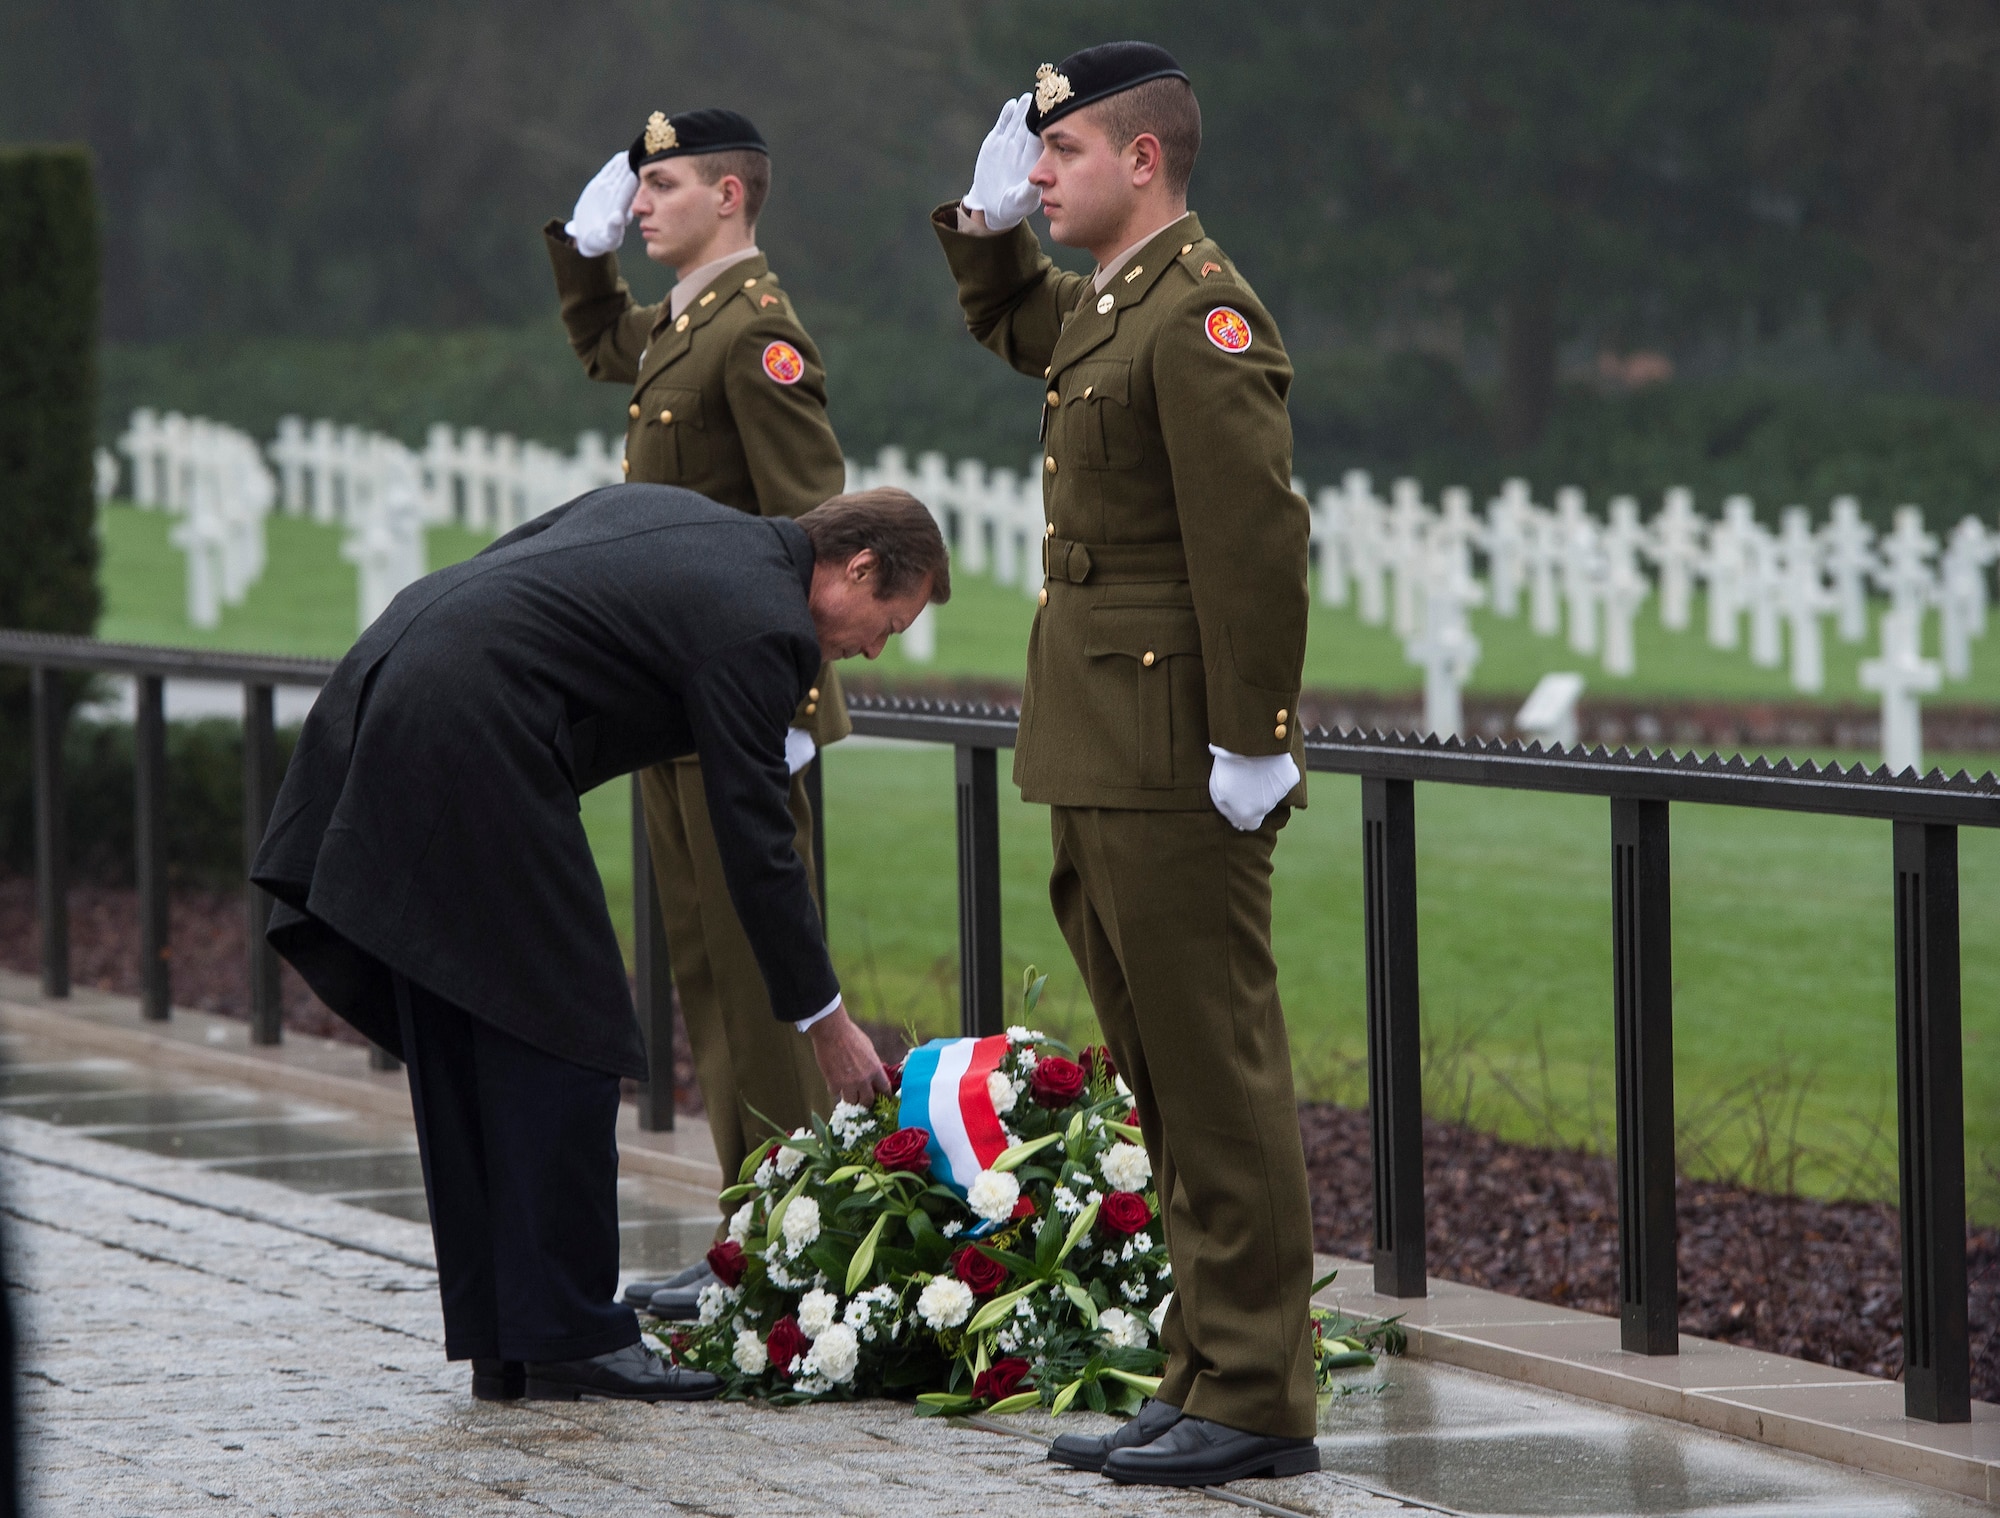 Grand Duke Henri of Luxembourg places a flower on a memorial wreath during the Battle of the Bulge 70th Anniversary ceremony at the Luxembourg American Cemetery and Memorial in Luxembourg, Dec. 16, 2014. The cemetery holds 5,076 fallen American service members, many of whom lost their lives during the Battle of the Bulge. (U.S. Air Force photo by Staff Sgt. Chad Warren/Released)